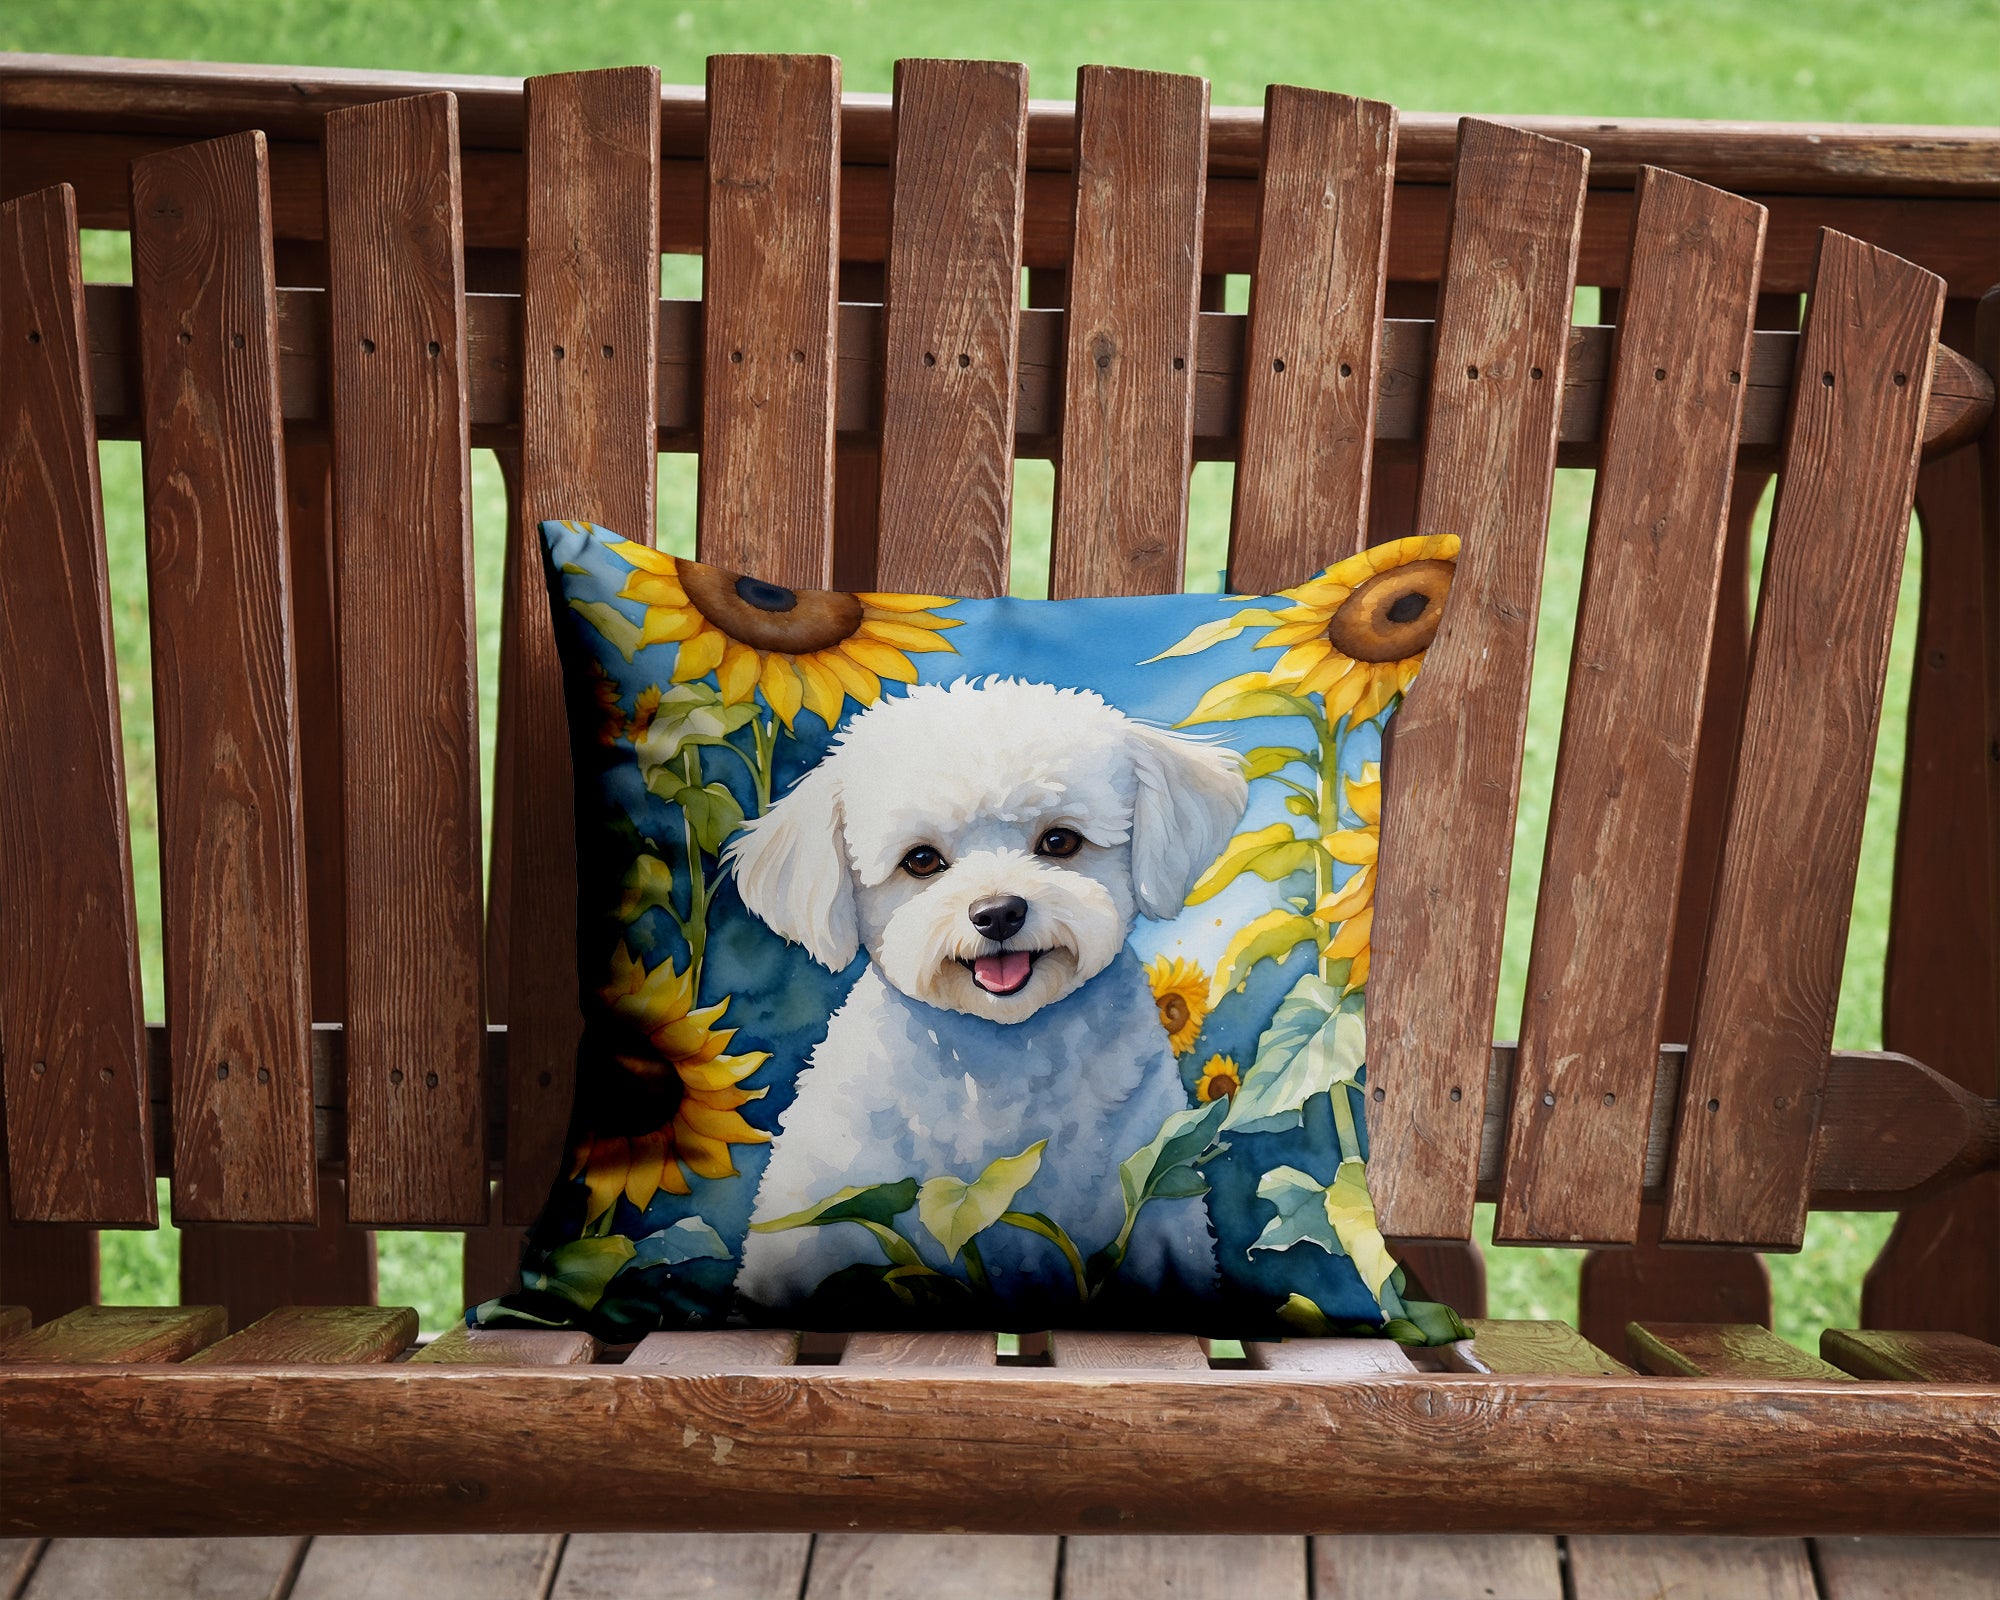 Buy this Bichon Frise in Sunflowers Throw Pillow